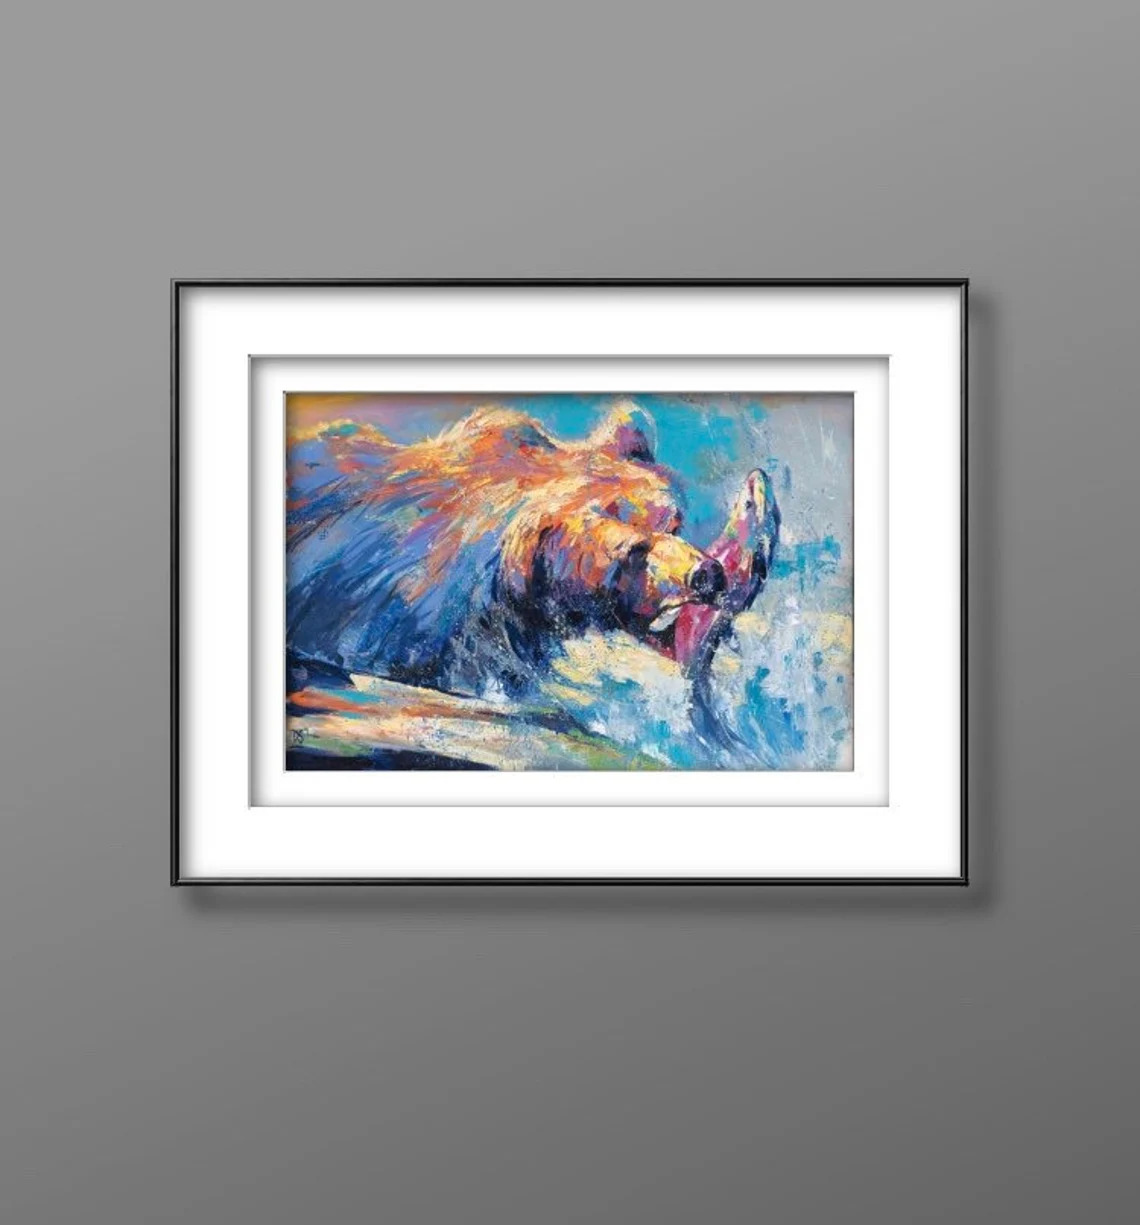 "Fishing" - Grizzly Bear - Wildlife Artwork Sample on Wall